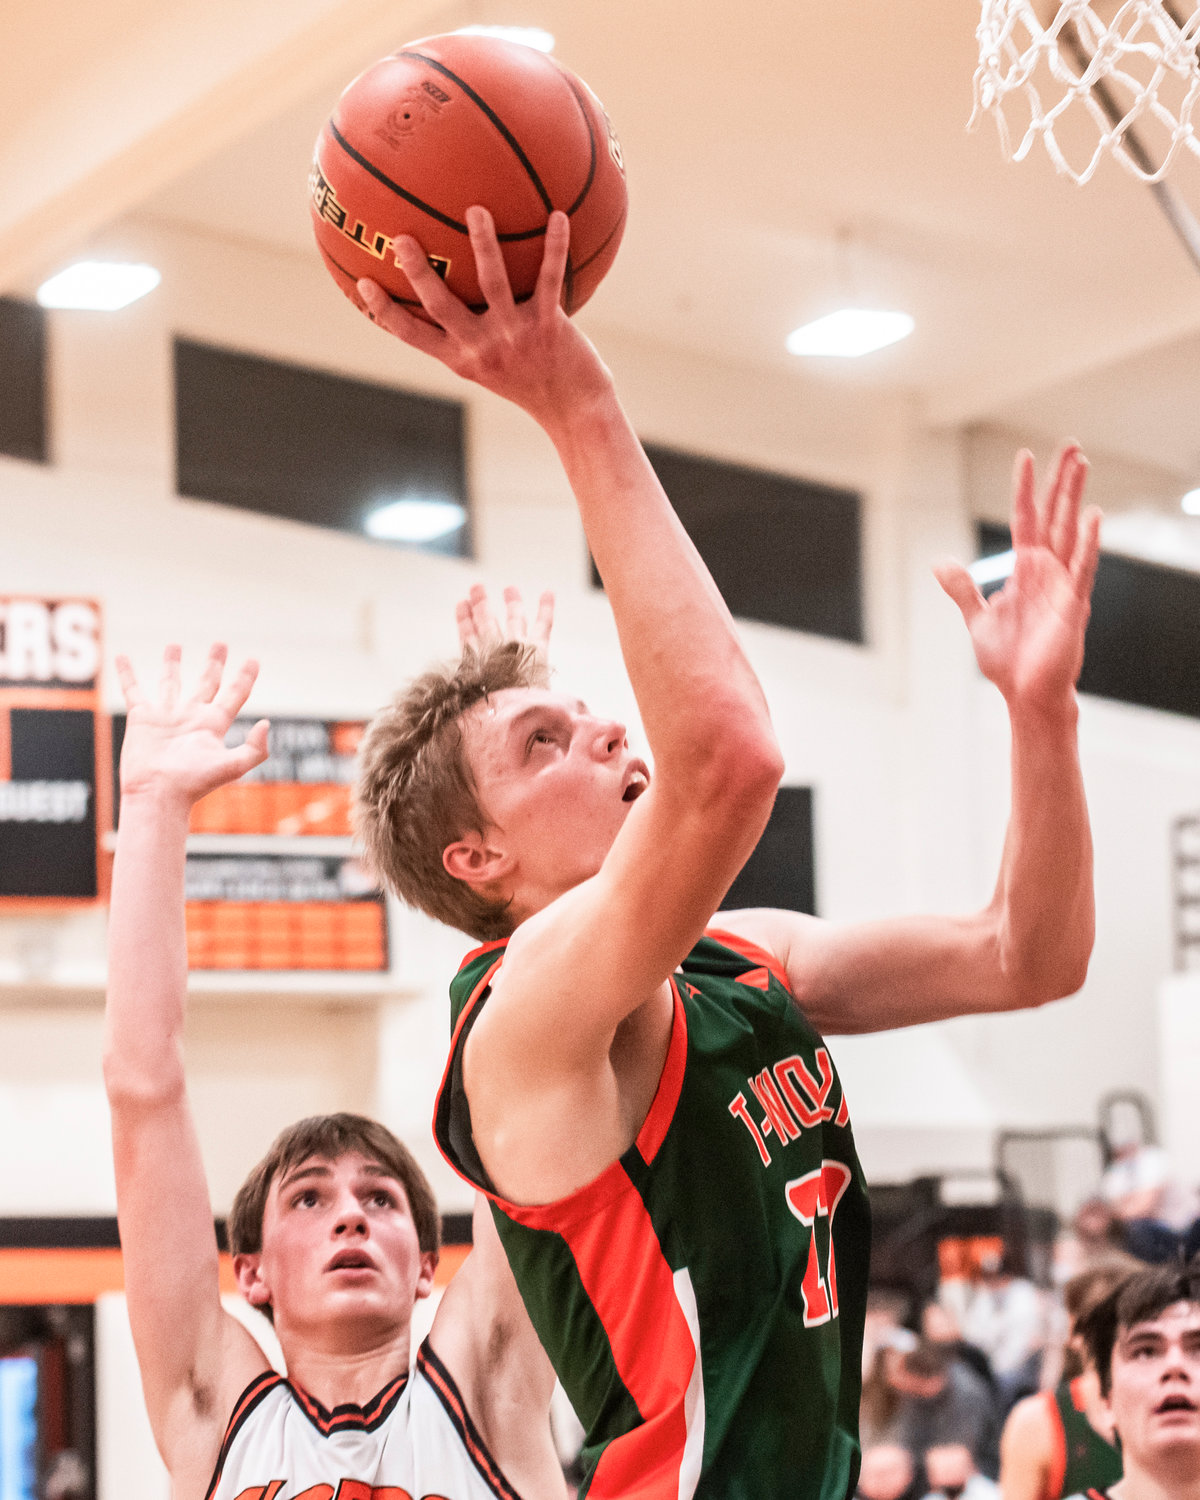 MWP’s Gary Dotson (20) looks to score Tuesday night during a game in Napavine.